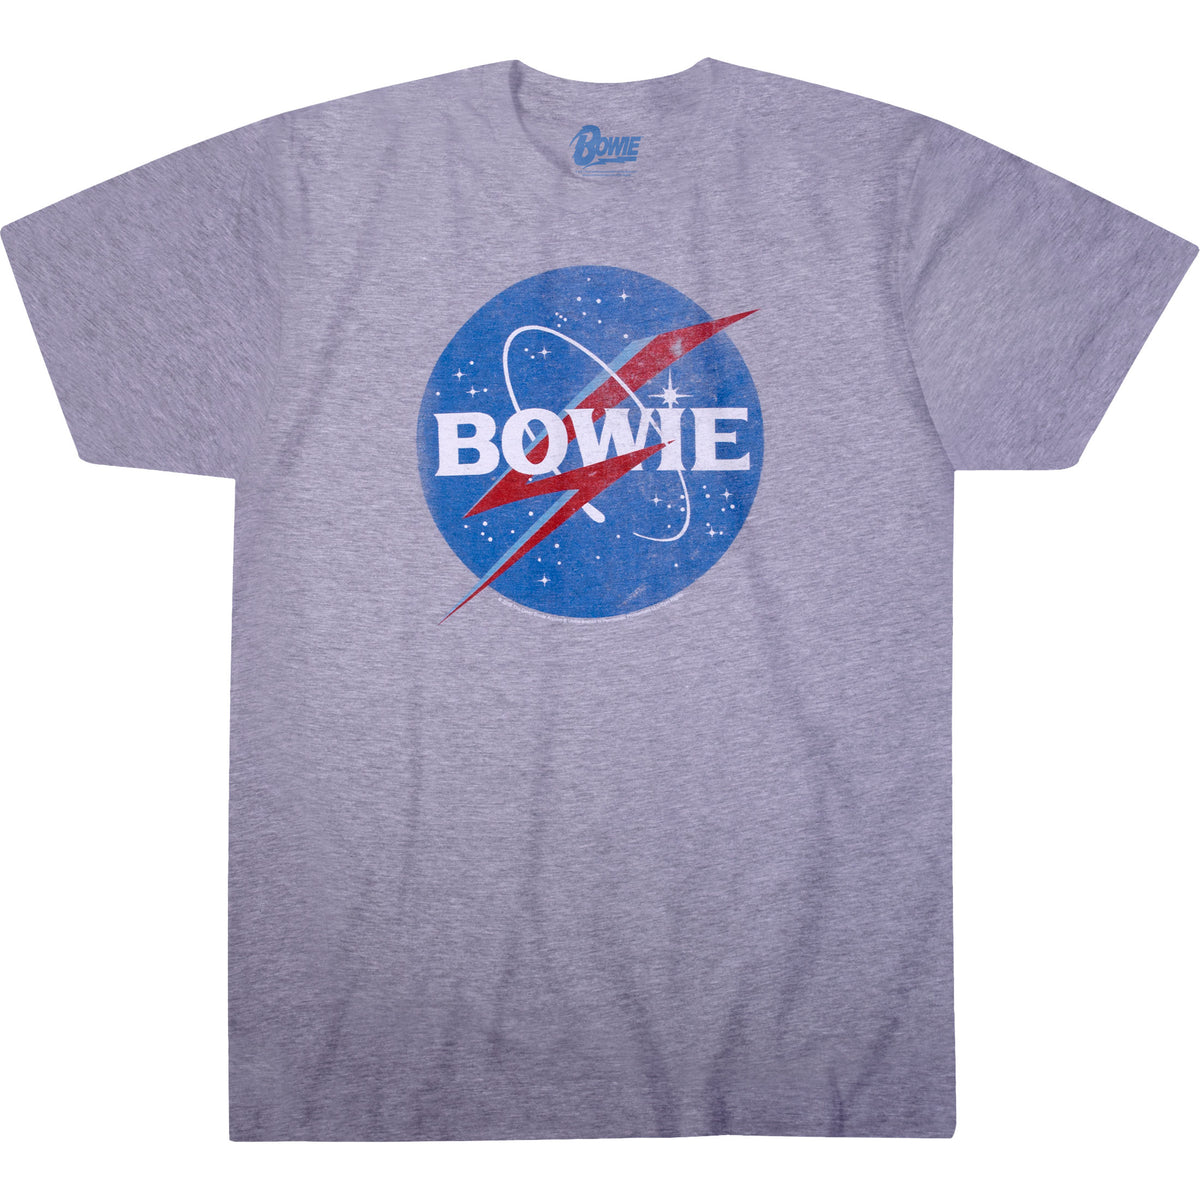 David Bowie - Bowies In Space T-Shirt (Men)